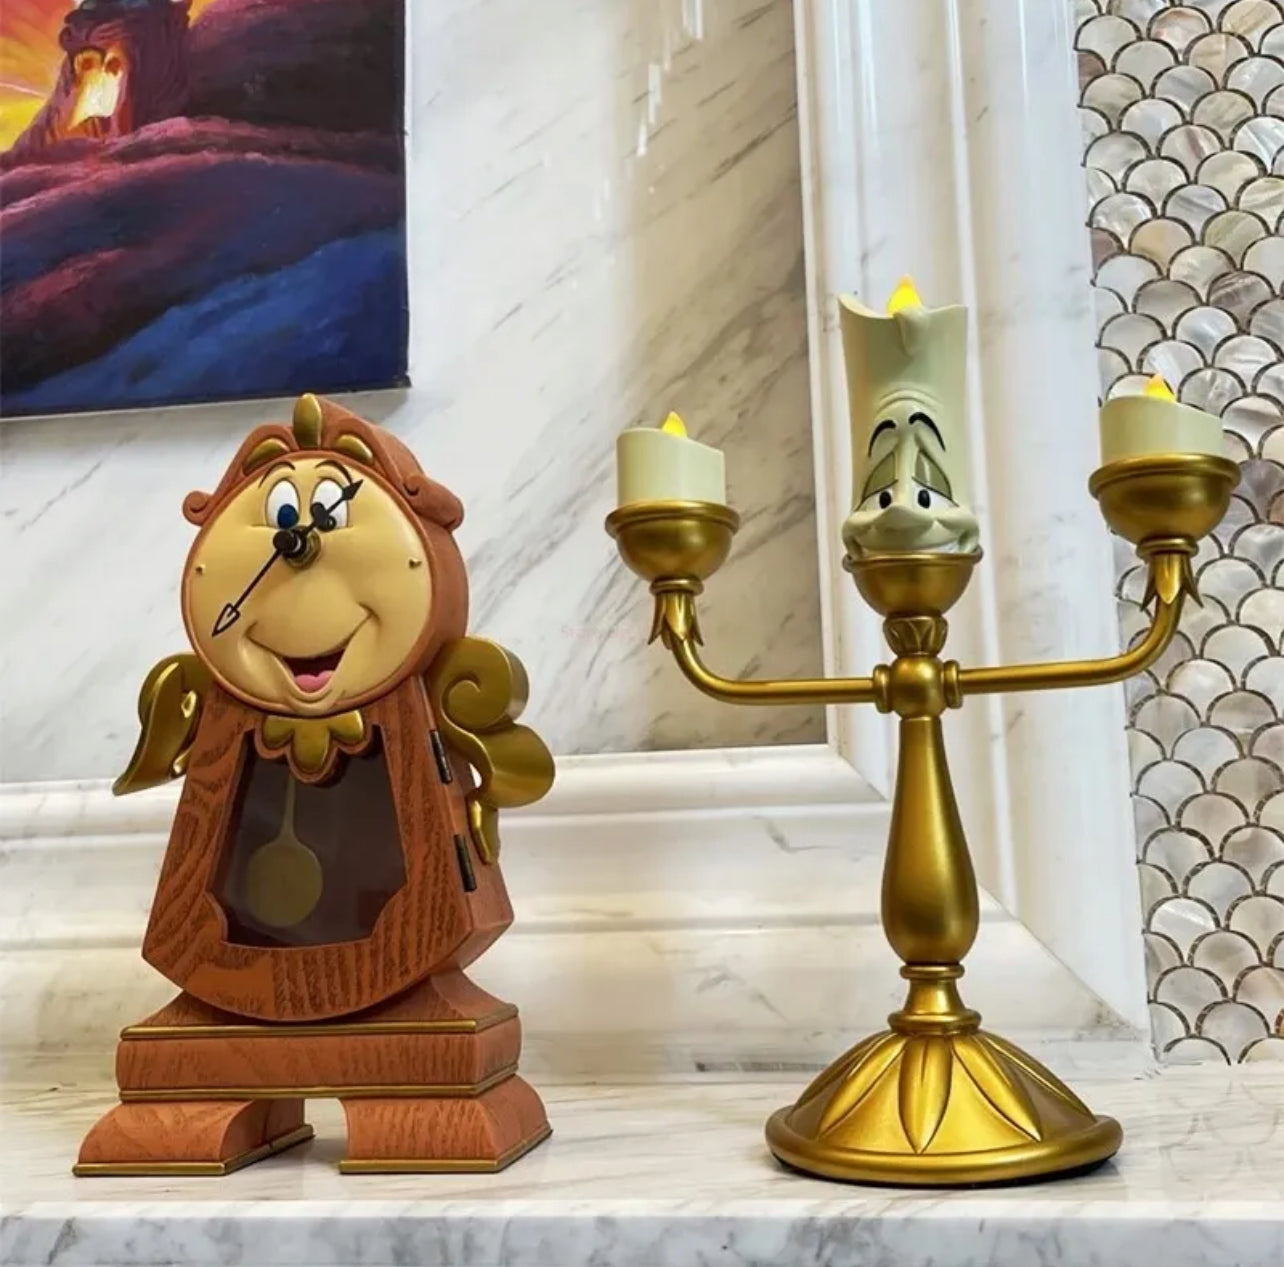 Beauty And The Beast Disney Action Figures Cogsworth Mr Clock, Lumiere Candle Lamp Statue